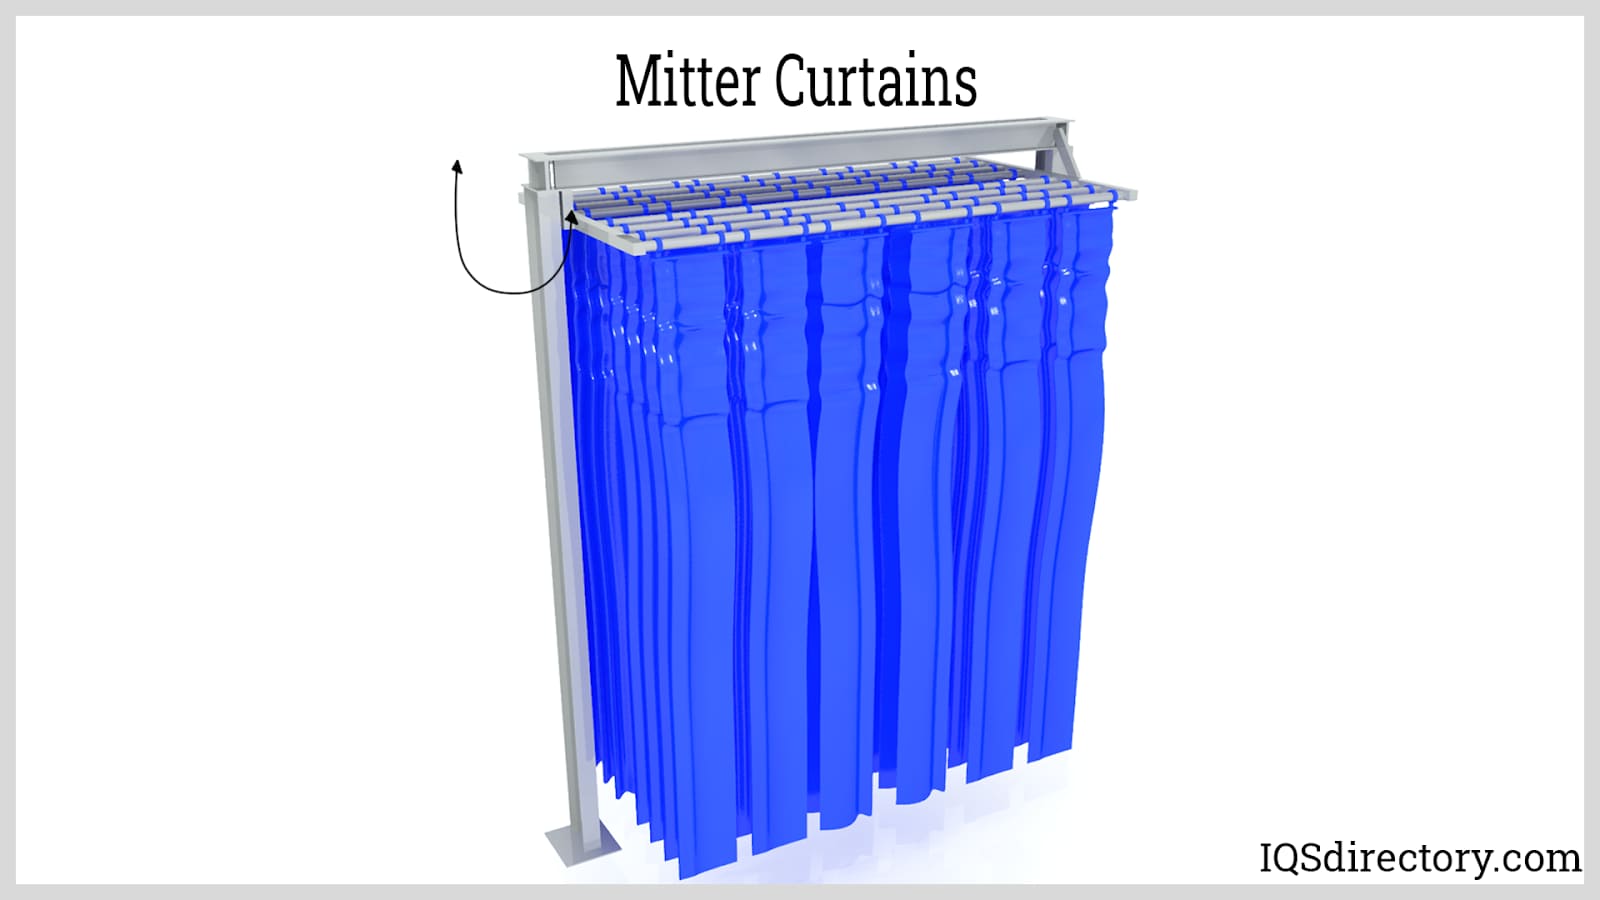 Mitter Curtains